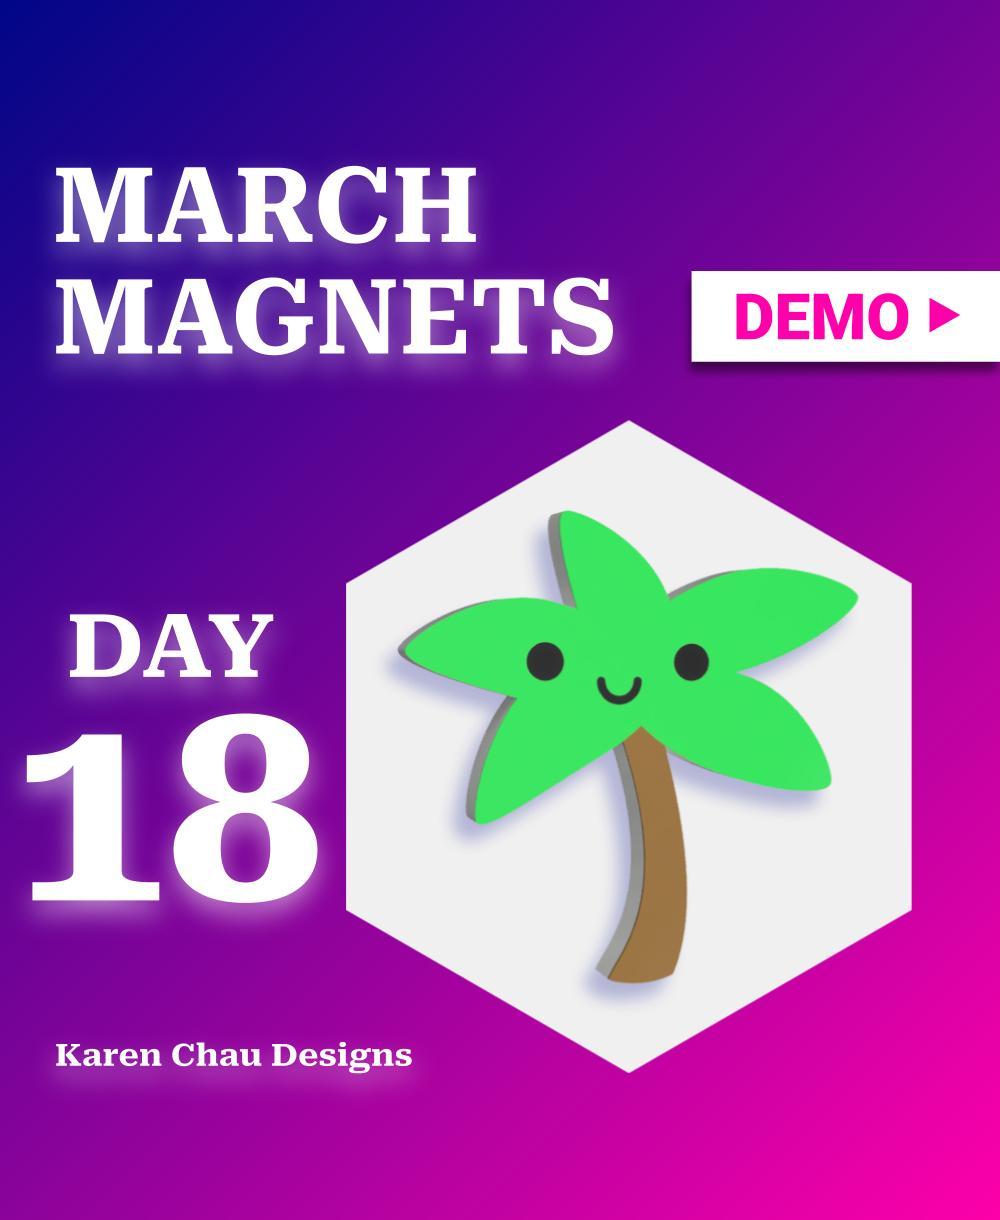 March Magnets - Day 18 #marchmagnets | Kawaii palm tree magnet 3d model